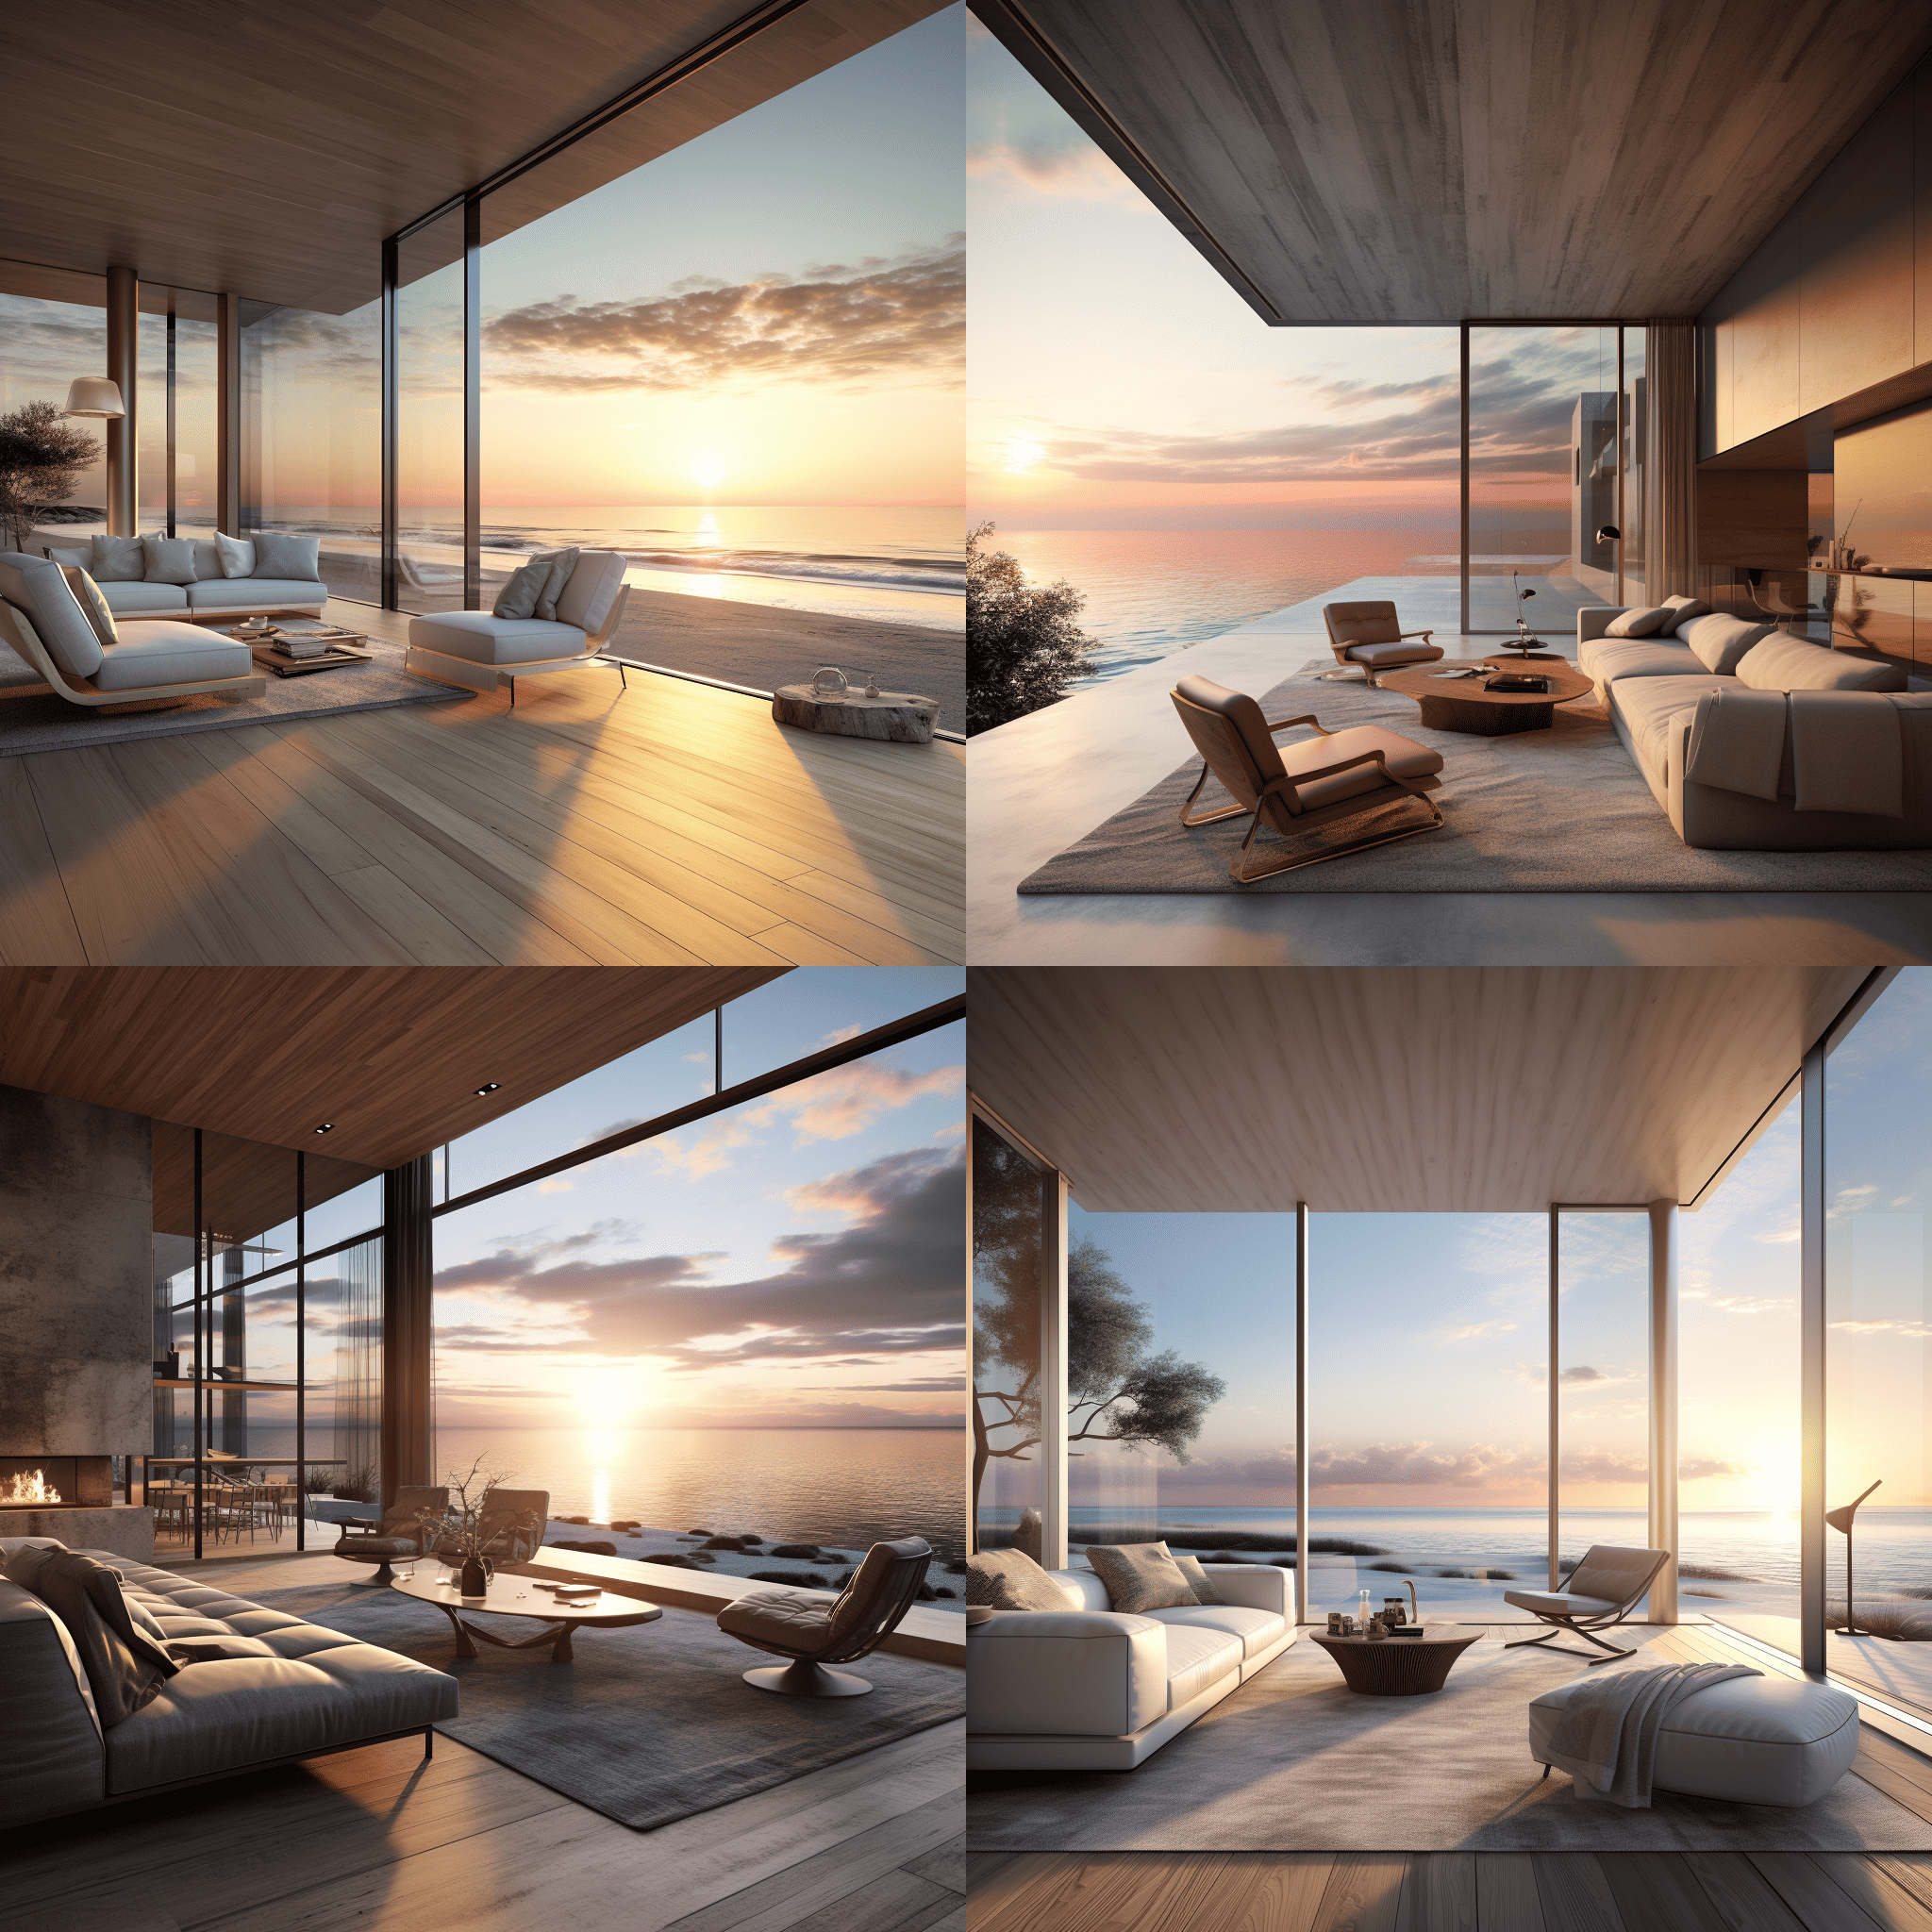 A modern minimalist loft with floor-to-ceiling windows overlooking a tranquil beach at sunset. --quality 1